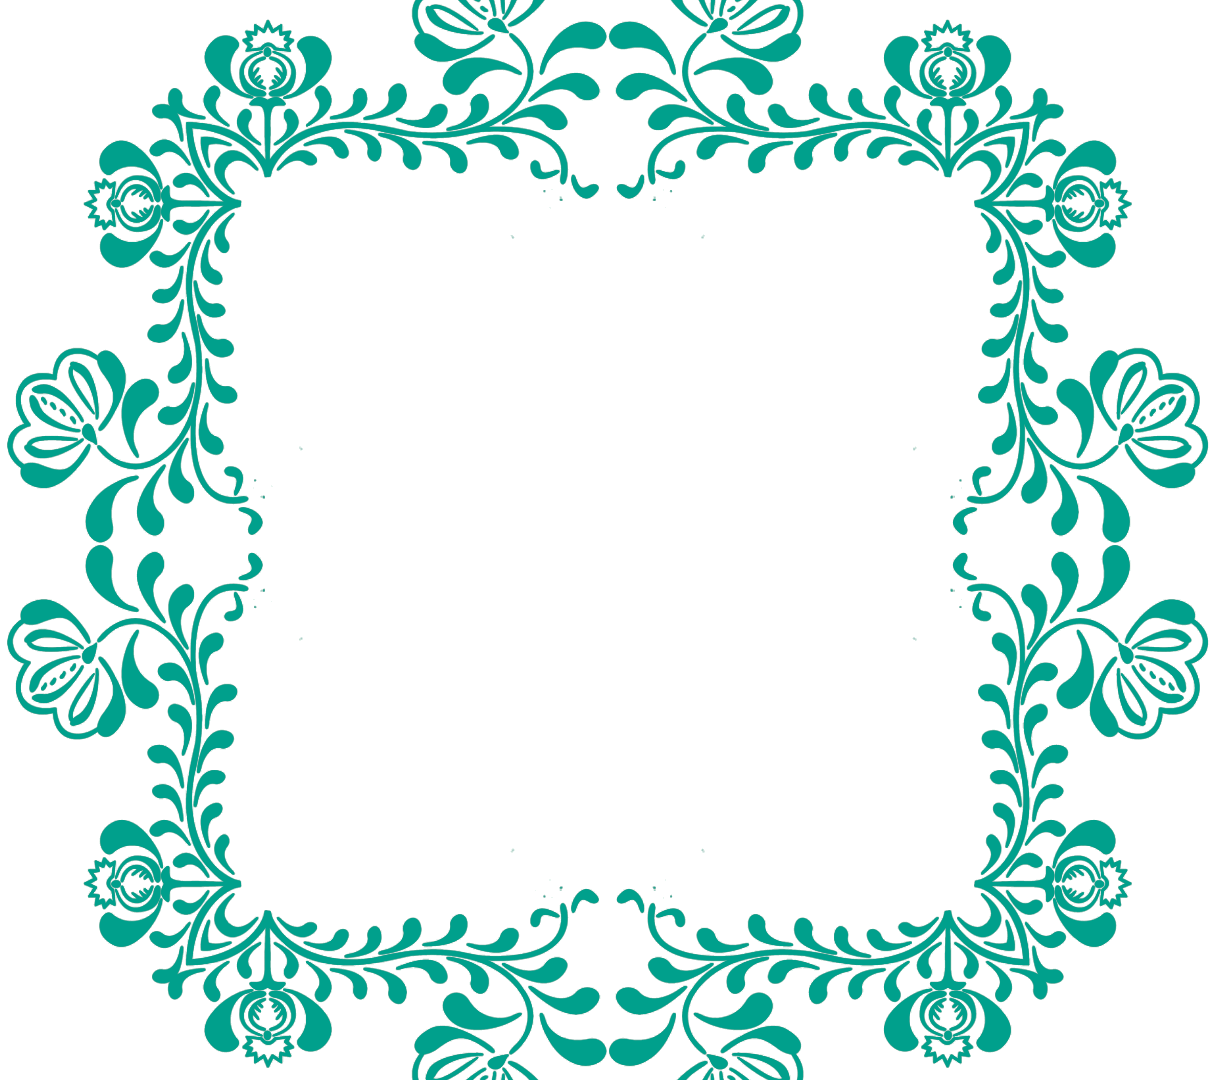 White and simple frame